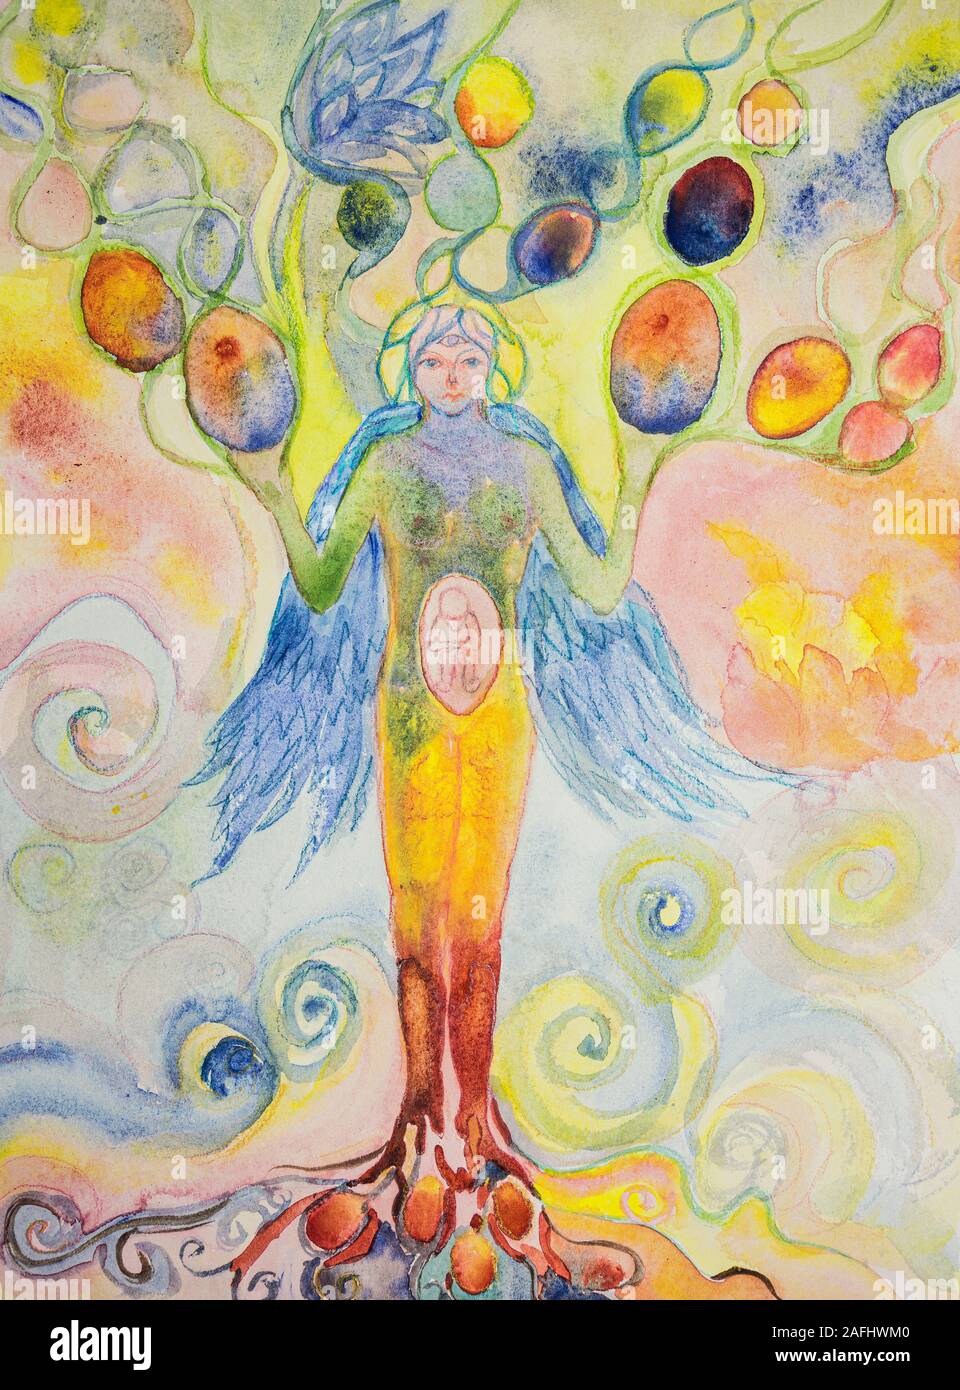 Woman tree of life. The dabbing technique near the edges gives a soft focus effect due to the altered surface roughness of the paper. Stock Photo